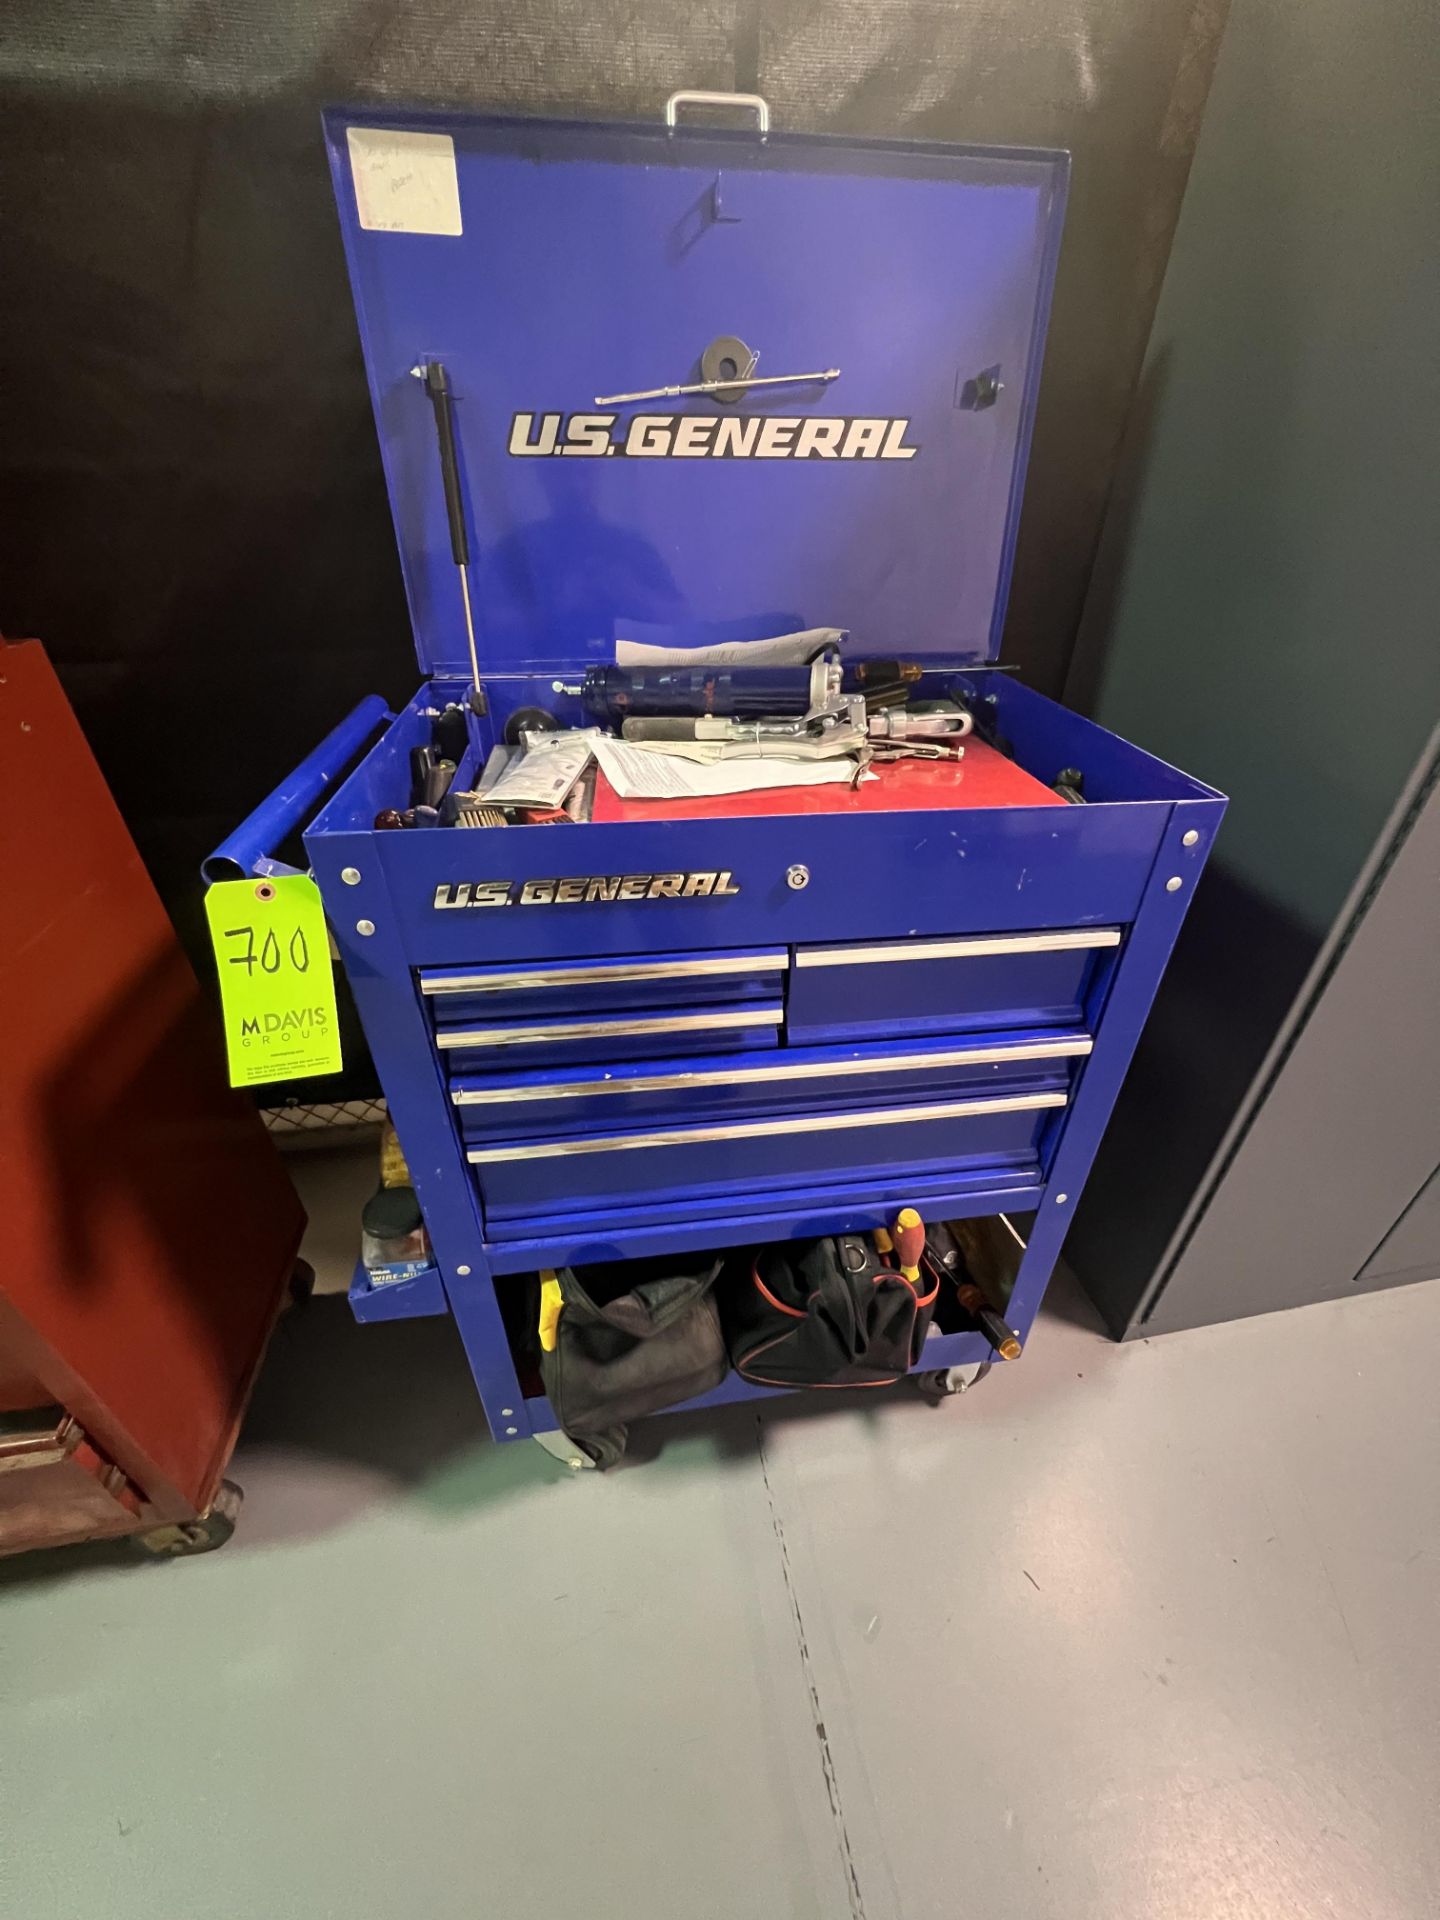 U.S. GENERAL TOOL CABINET WITH CONTENTS